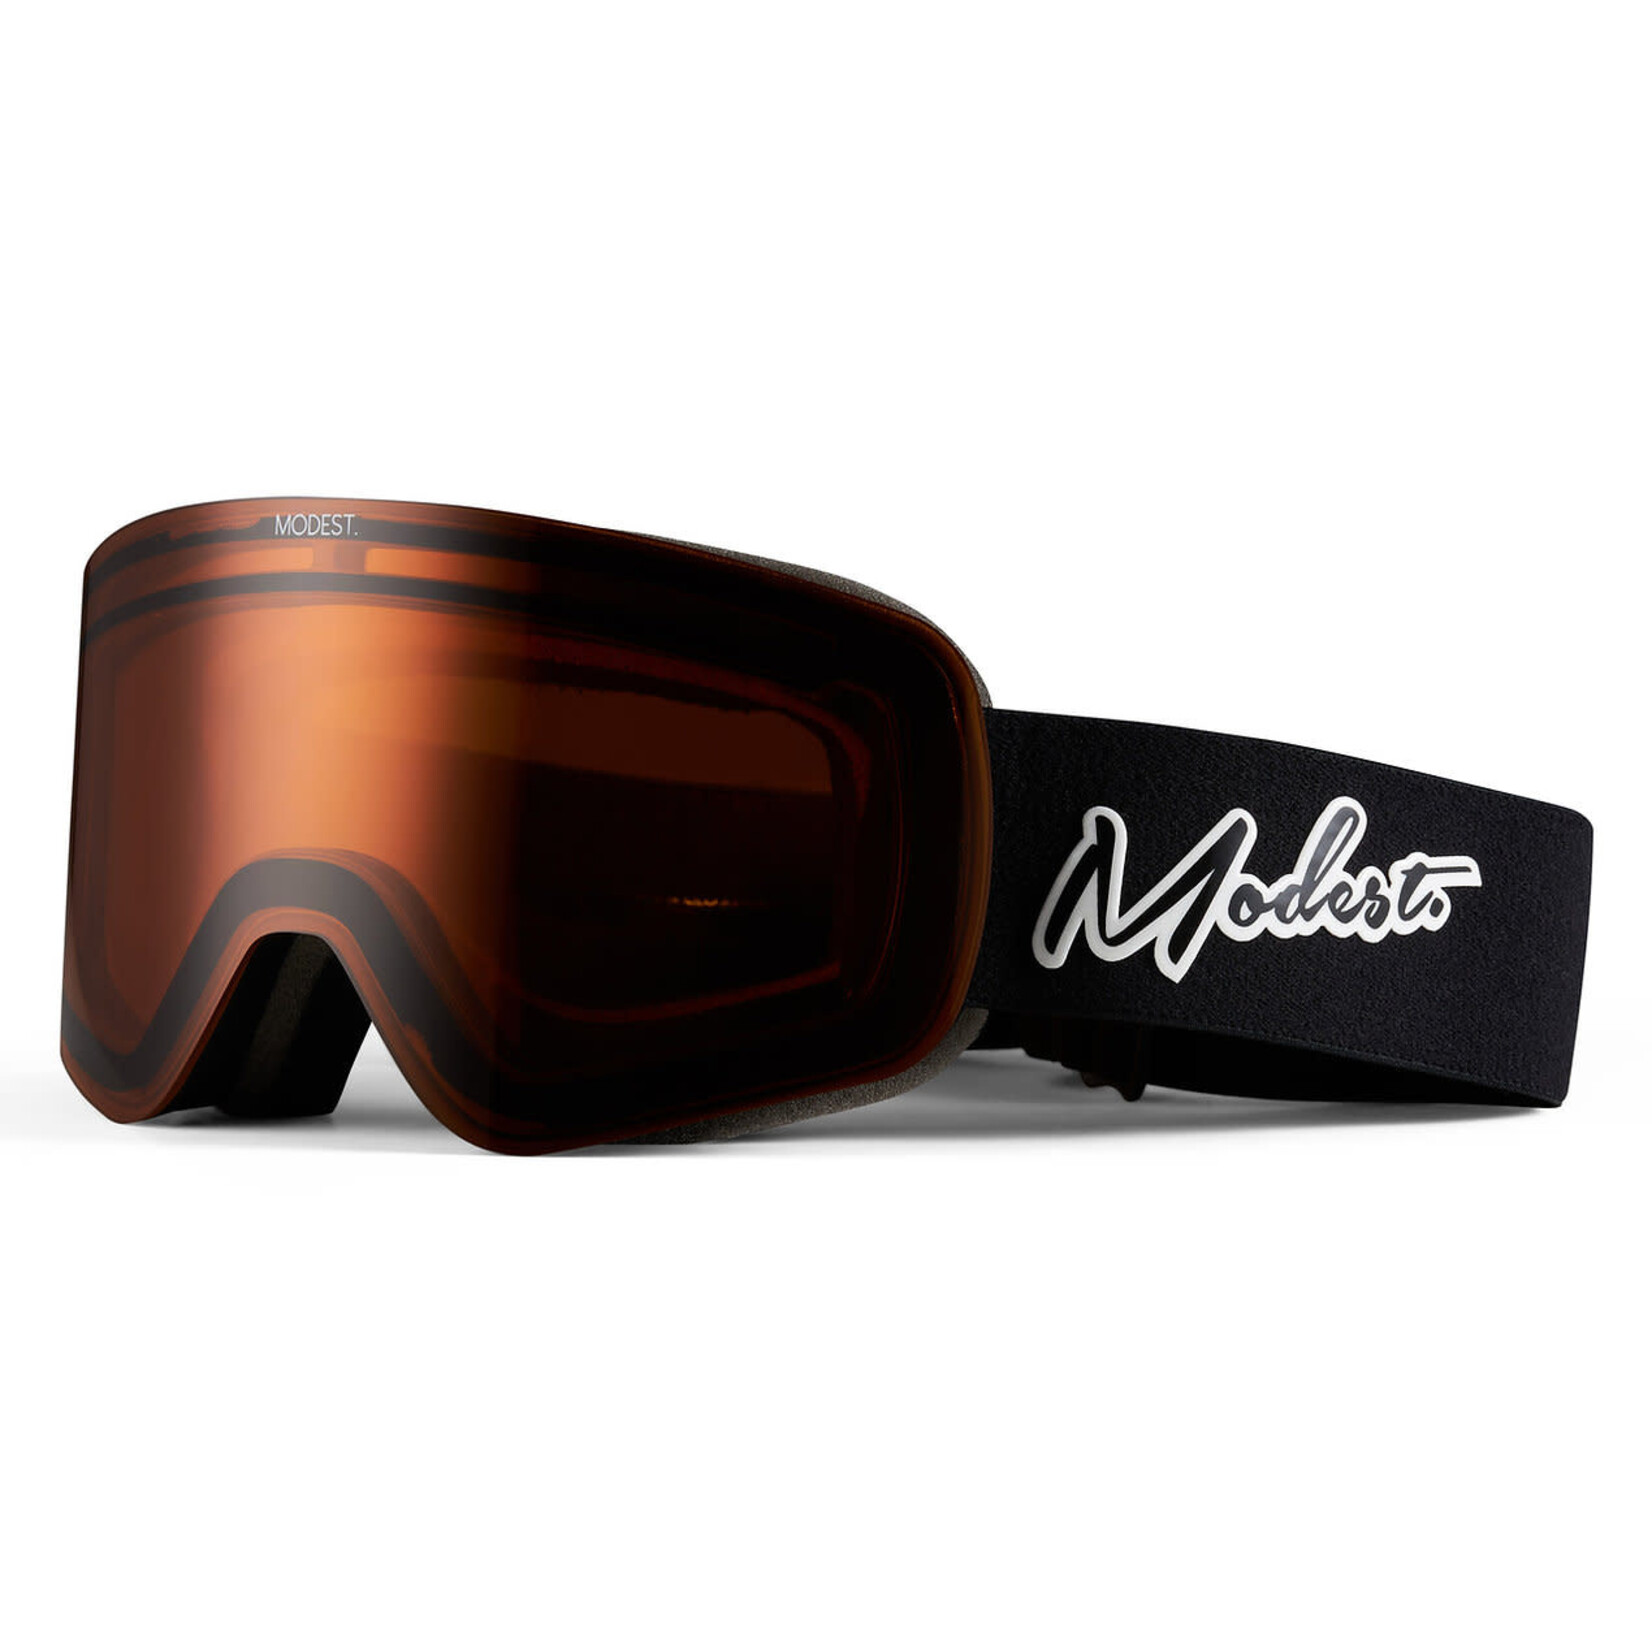 Modest Modest Cub Youth Goggle- Black